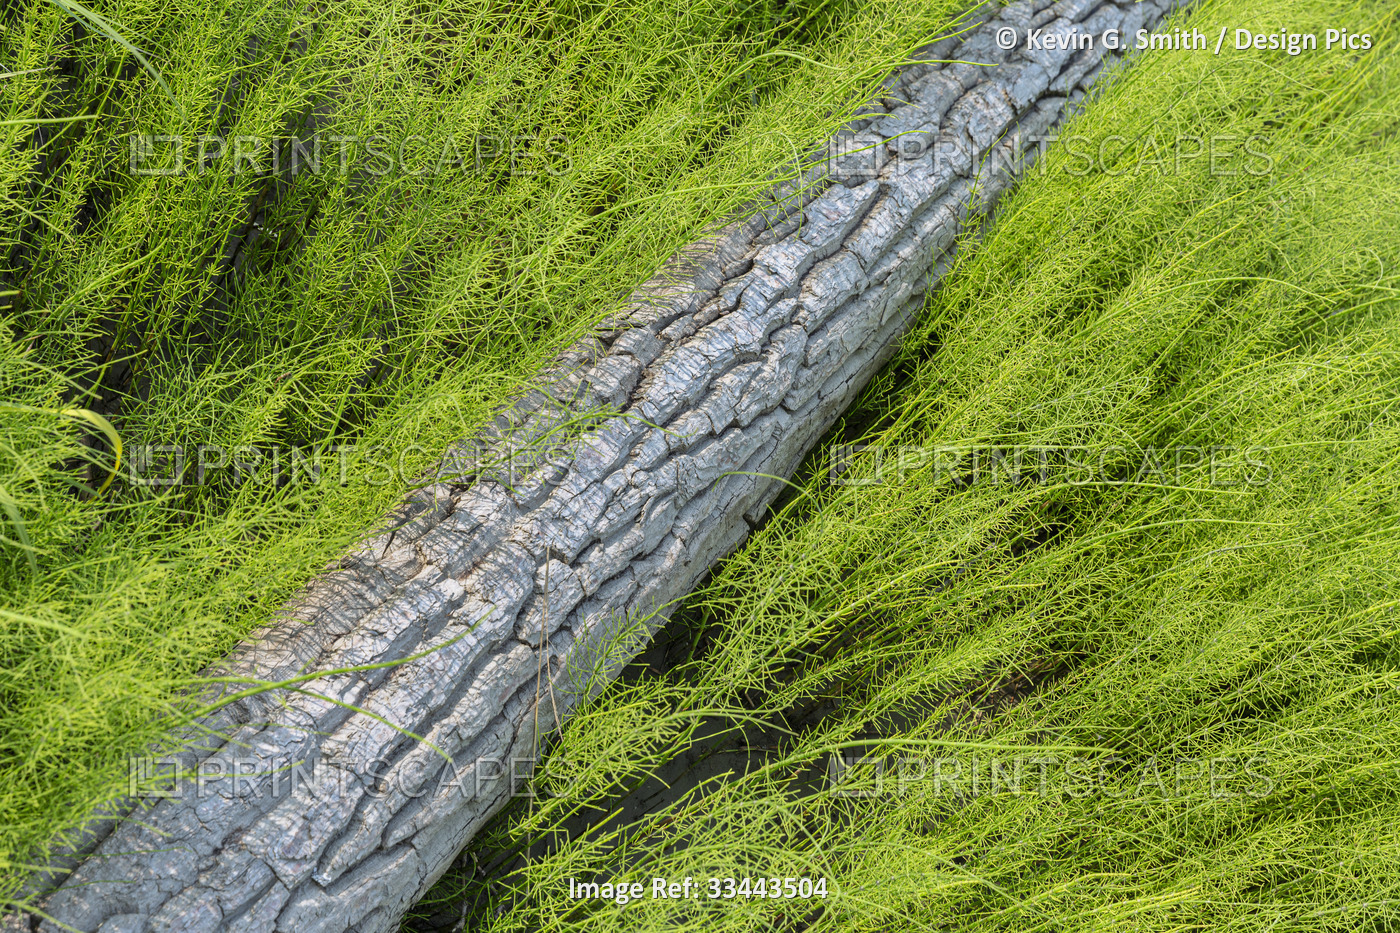 Close-up of wild, green grassy plants in a field with an old fallen tree log in ...